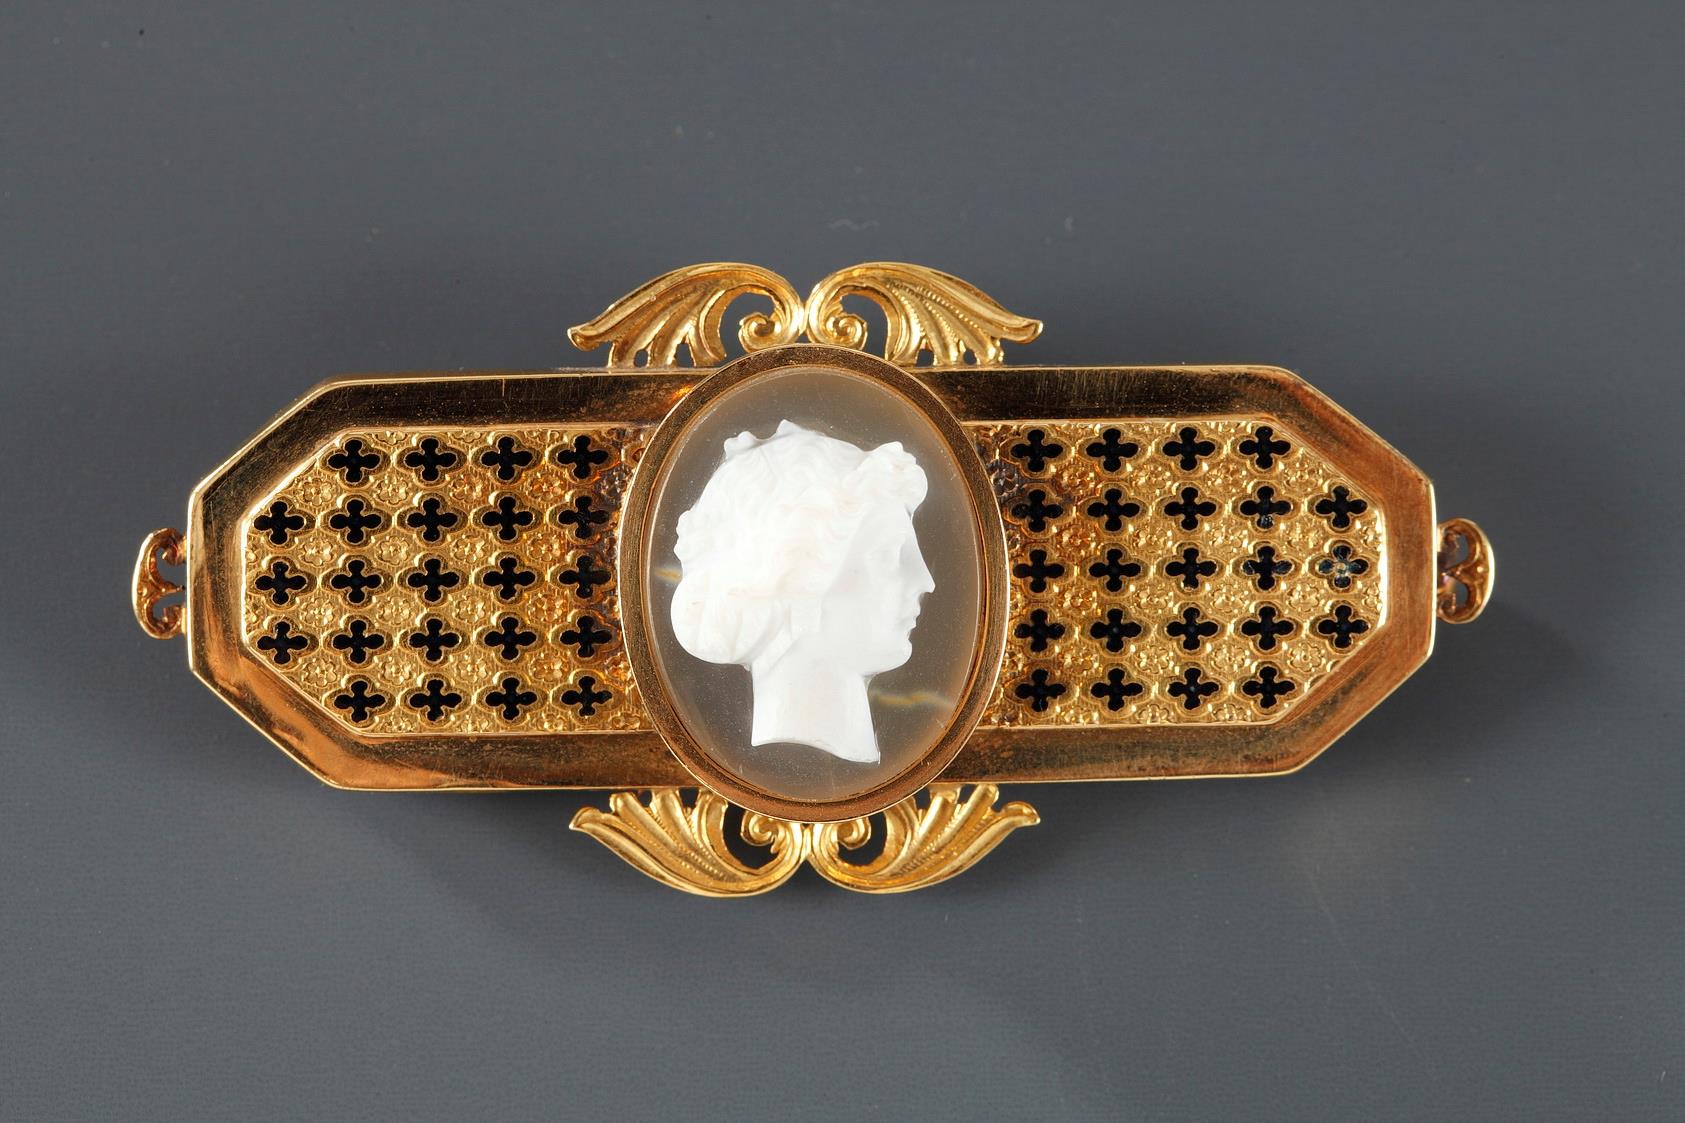 19th Century Gold-mounted and enamel cameo brooch. 